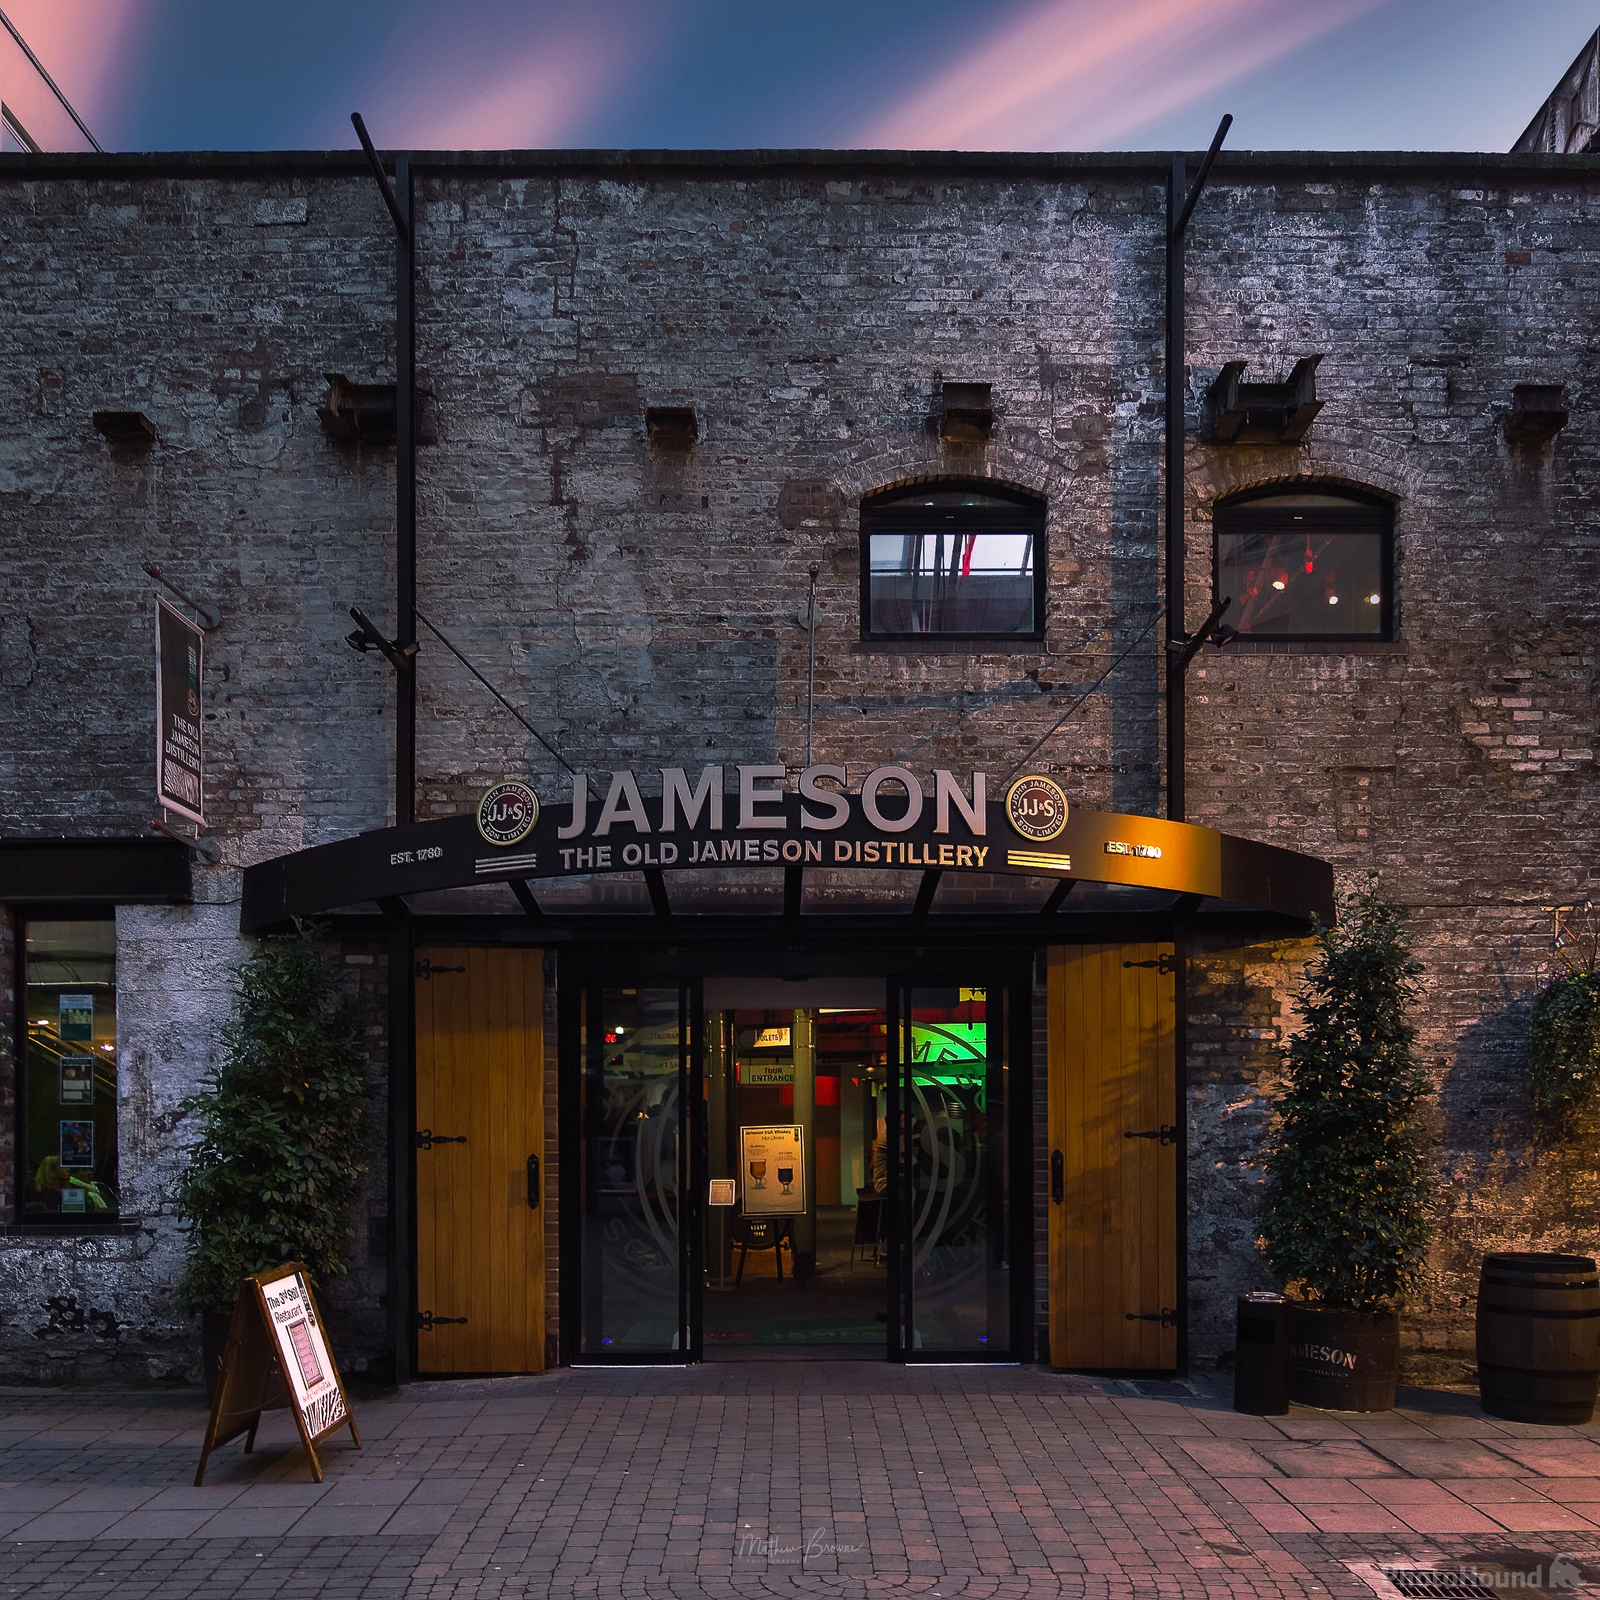 Image of Jameson Distillery by Mathew Browne